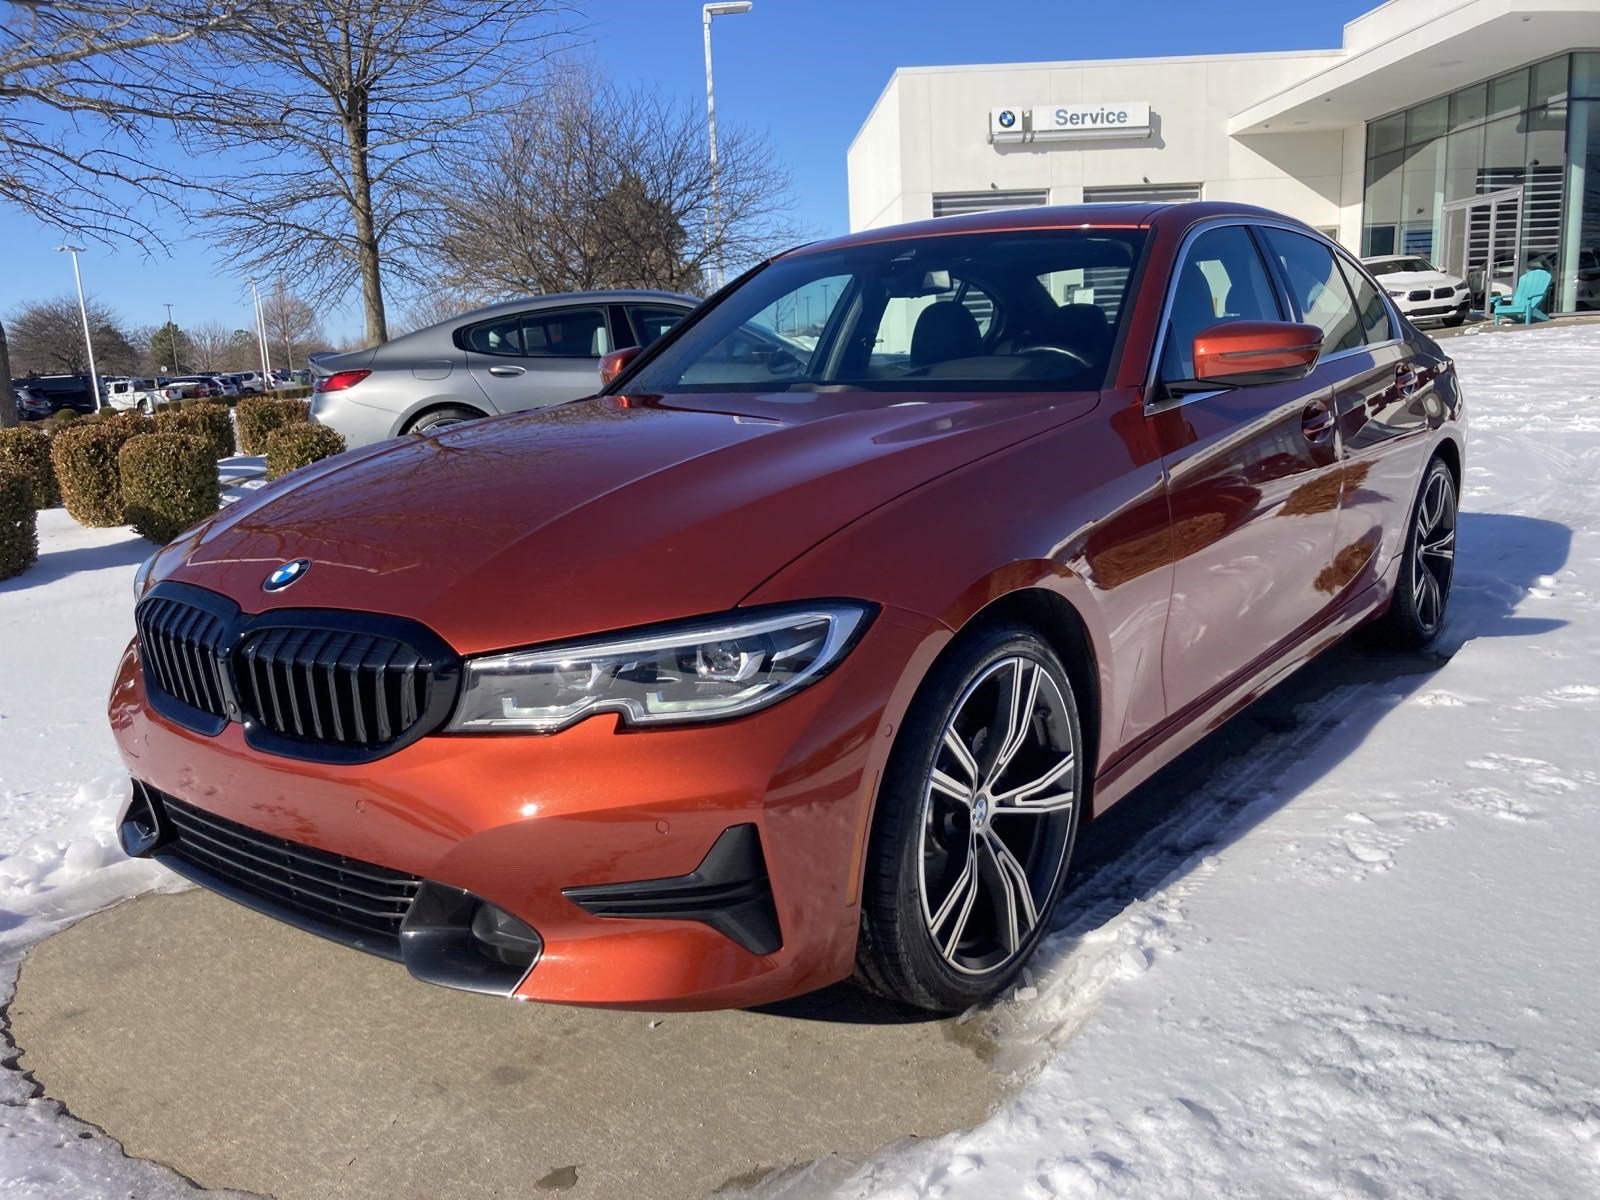 Certified Pre-Owned 2021 BMW 3 Series 330i 4dr Car in Bentonville #WB92985  | BMW of Northwest Arkansas